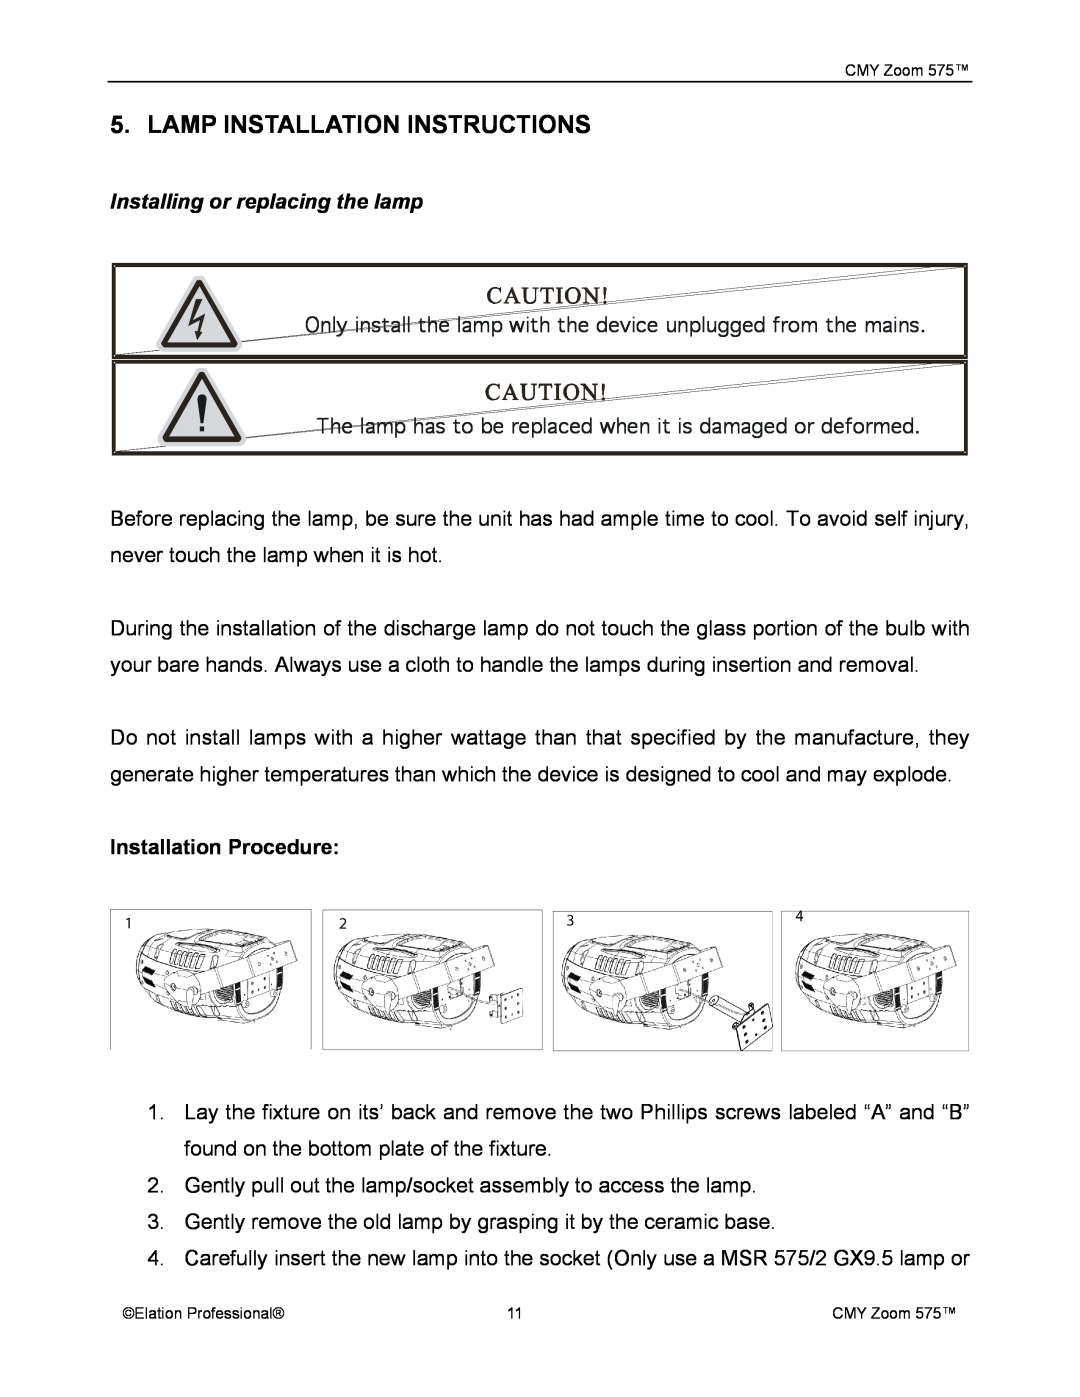 Elation Professional CMY Zoom 575 Lamp Installation Instructions, Installing or replacing the lamp, Installation Procedure 